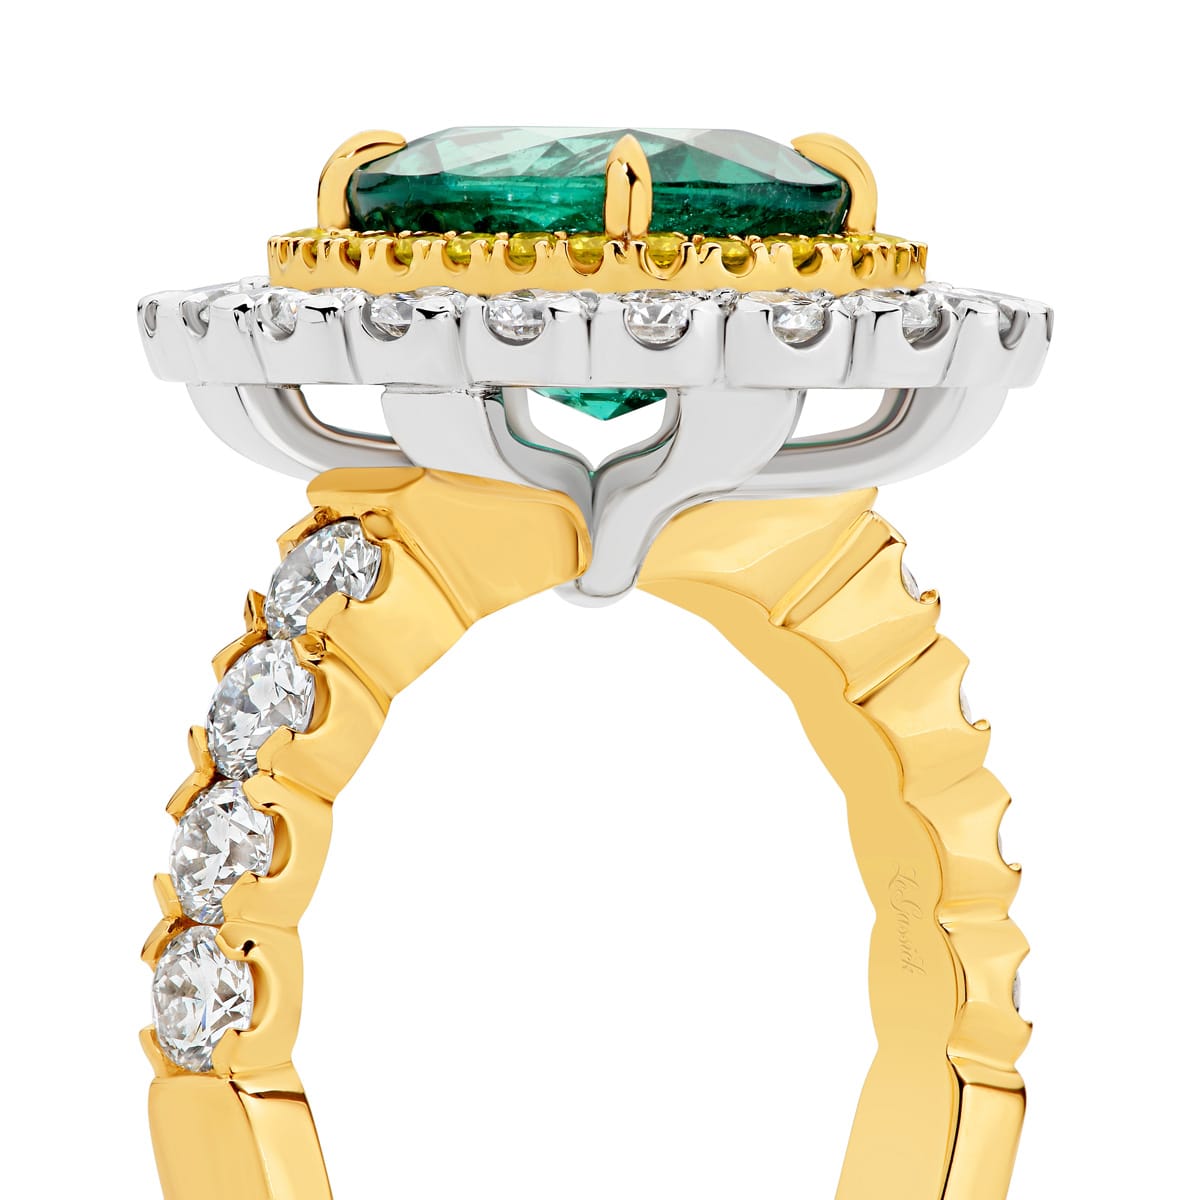 Kai-Mana features natural 3.79 carat oval-cut emerald enhanced by a halo of 28 fancy intense natural yellow diamonds. Surrounded the yellow diamonds in a halo of 20 white round billing cut diamonds. Kai-Mana also features 8 round brilliant cut white diamonds on the band. She was designed and handcrafted by LeGassick's Master Jewellers, Gold Coast, Australia.